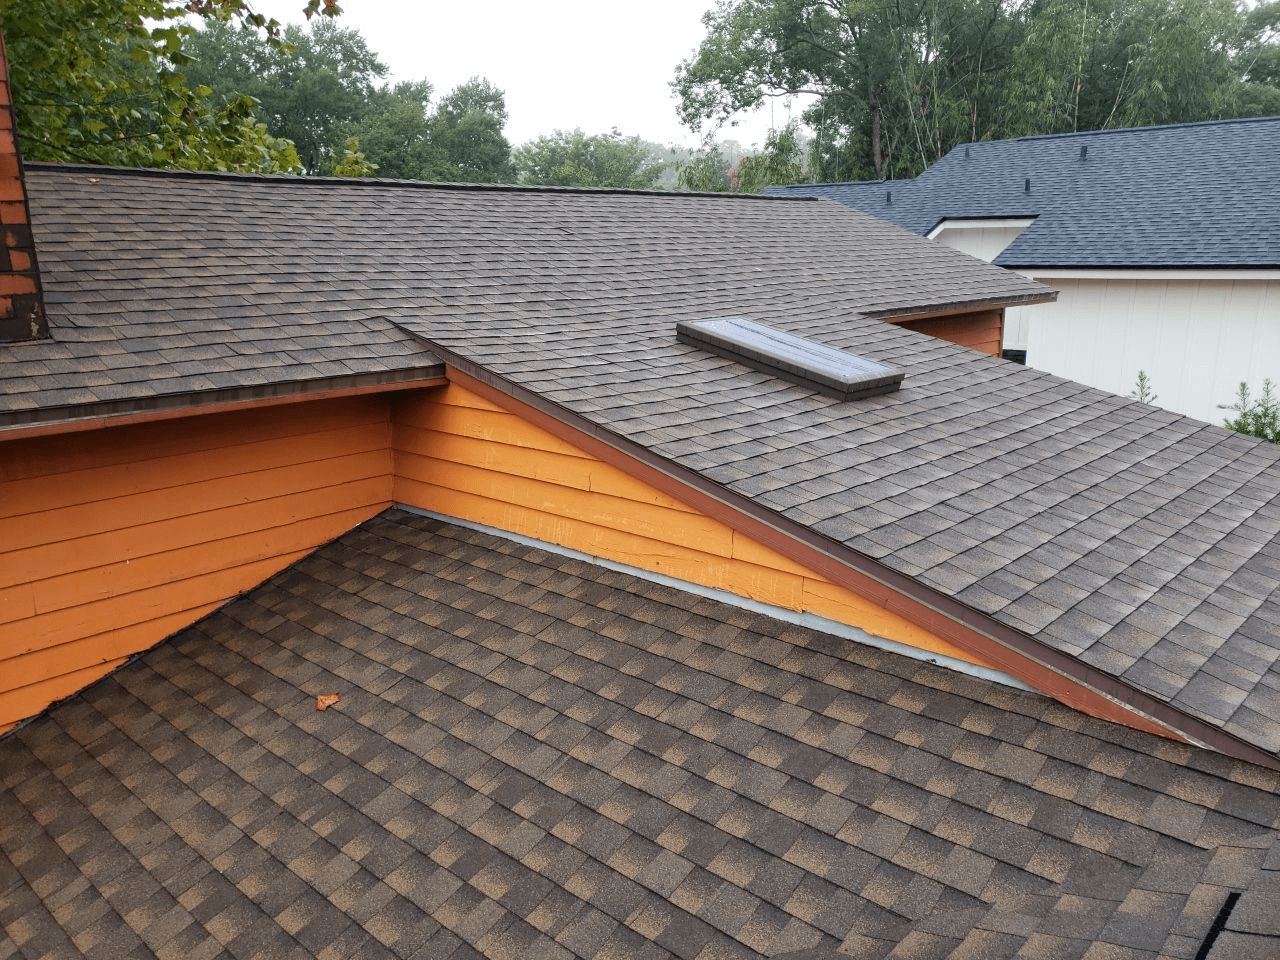 4 Signs You Need To Call For A Winter Park Roof Inspection Before The Holidays